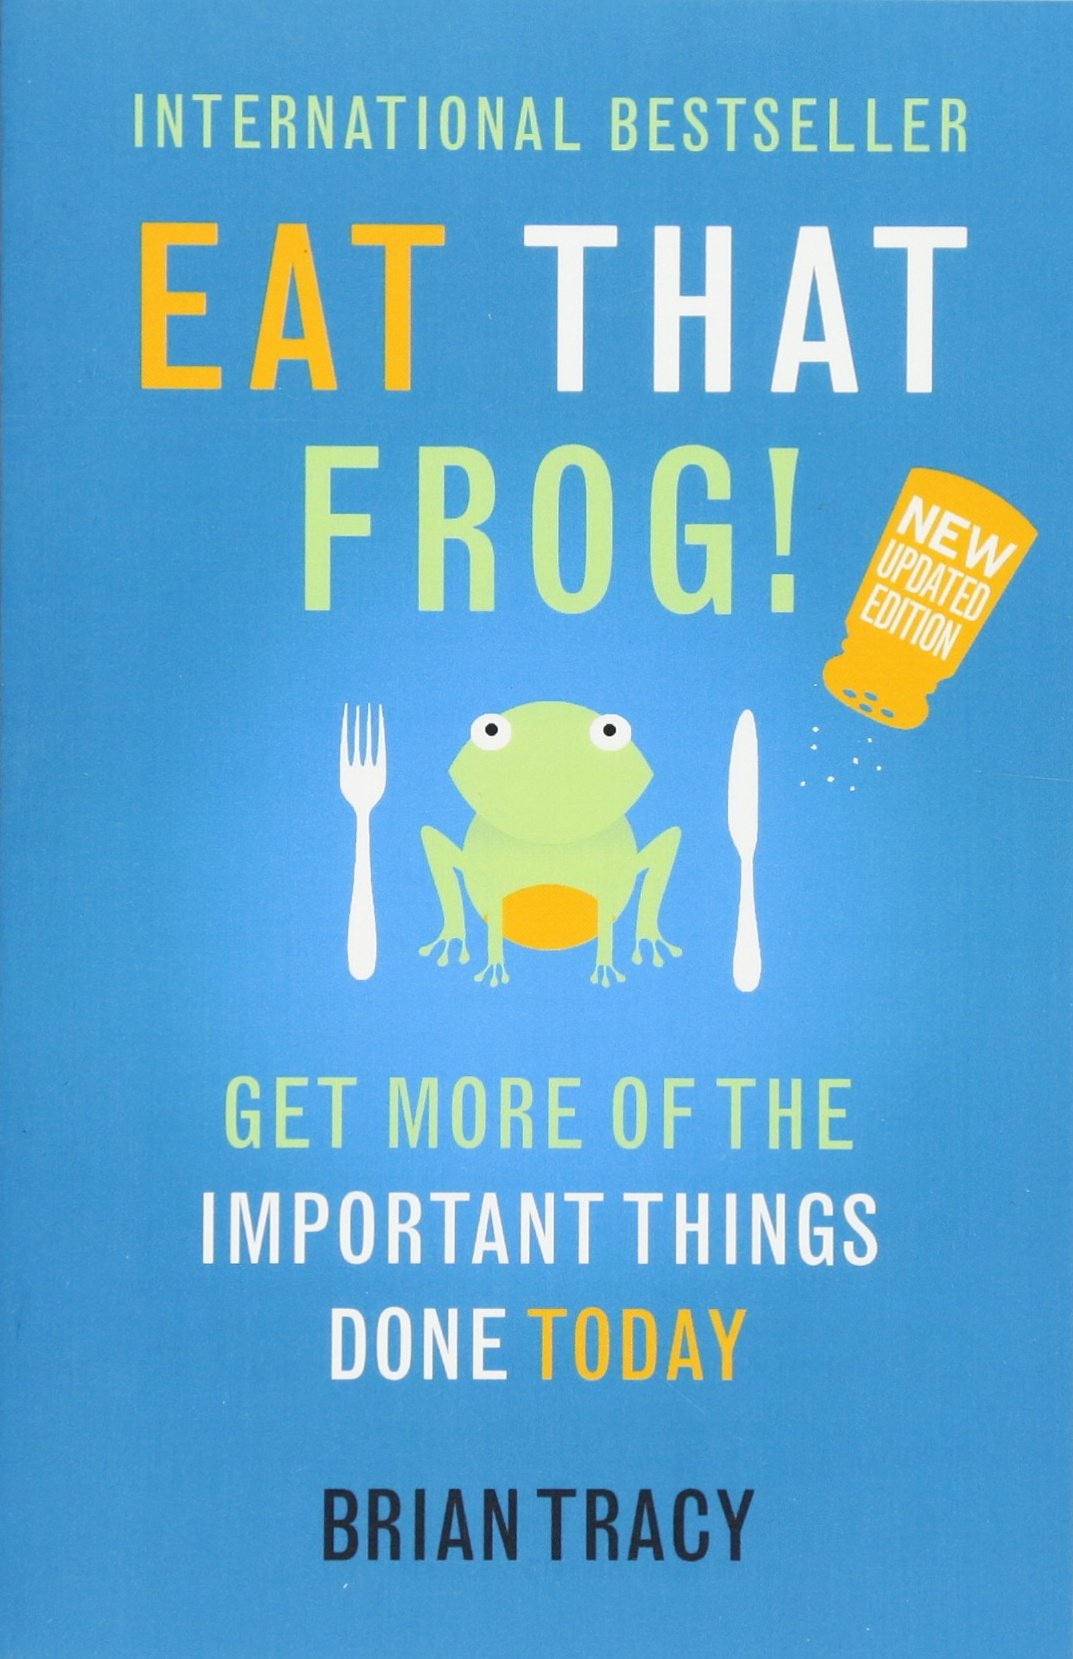 Done　21　Eat　Time　in　That　Frog!:　to　Stop　and　Great　More　Ways　Less　Procrastinating　Get　Prestige　Bookshop